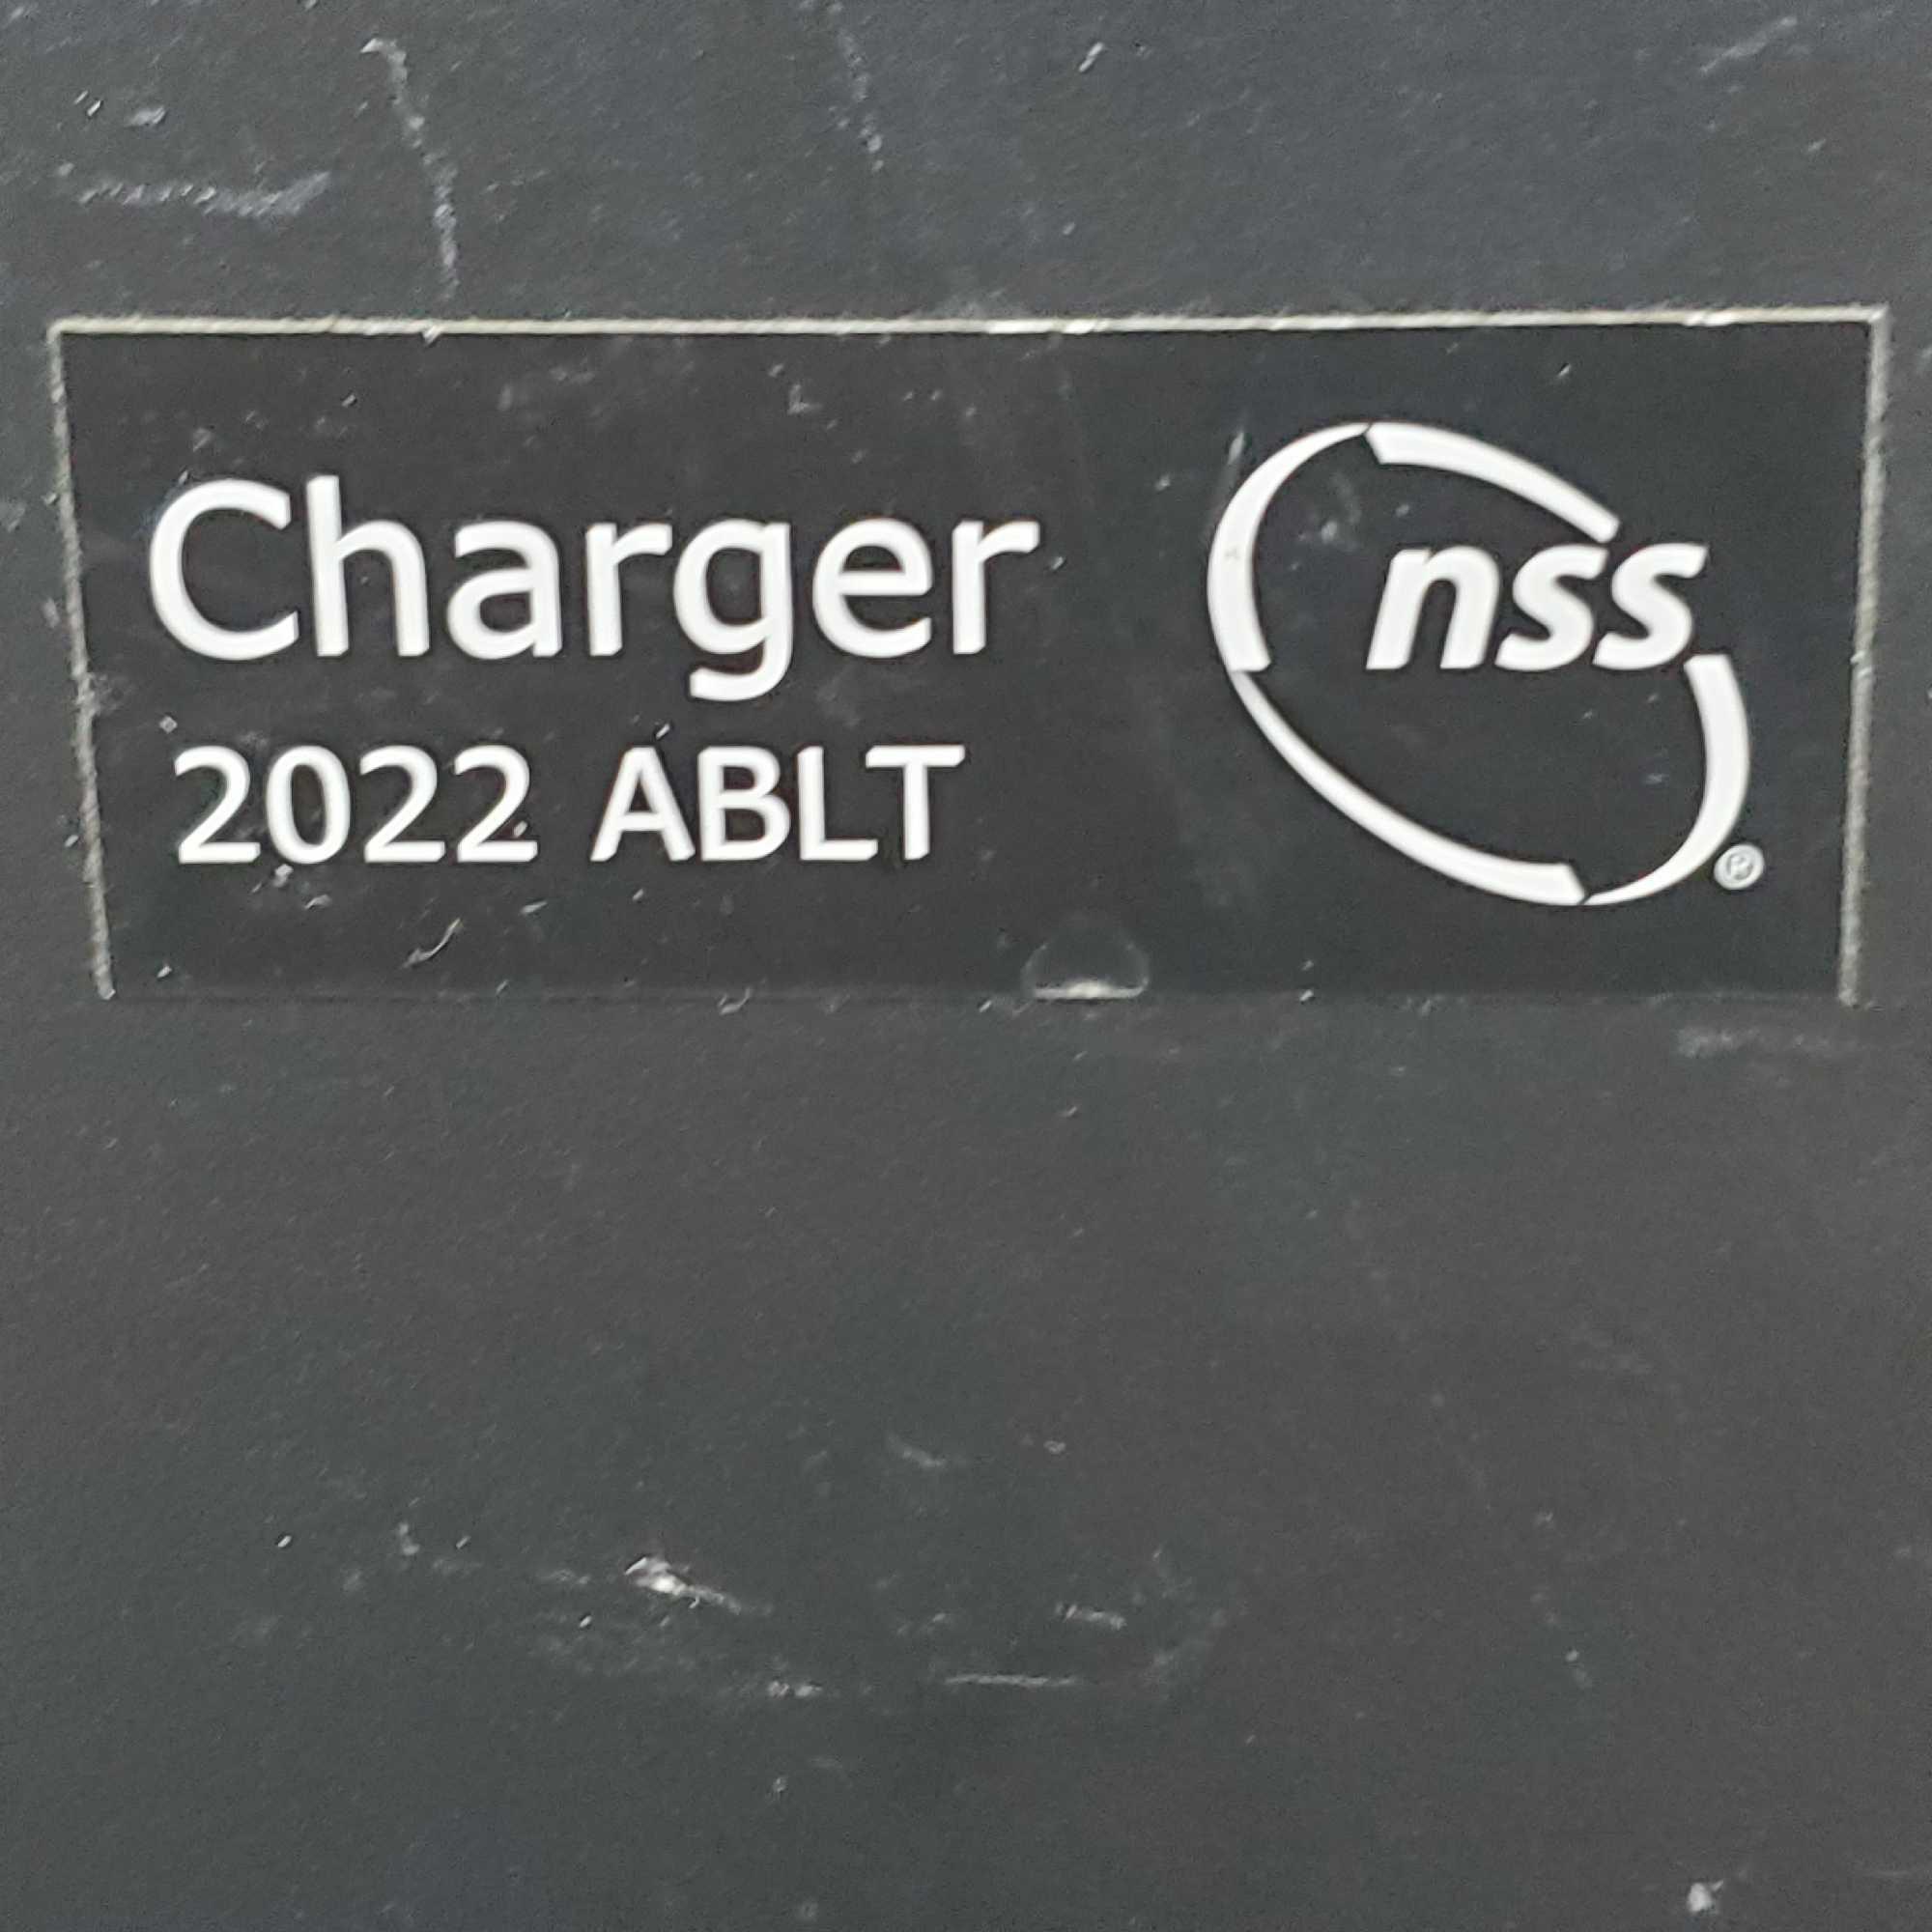 NSS Charger 2022 ABLT 20in pad walk-behind burnisher model 6402014 A